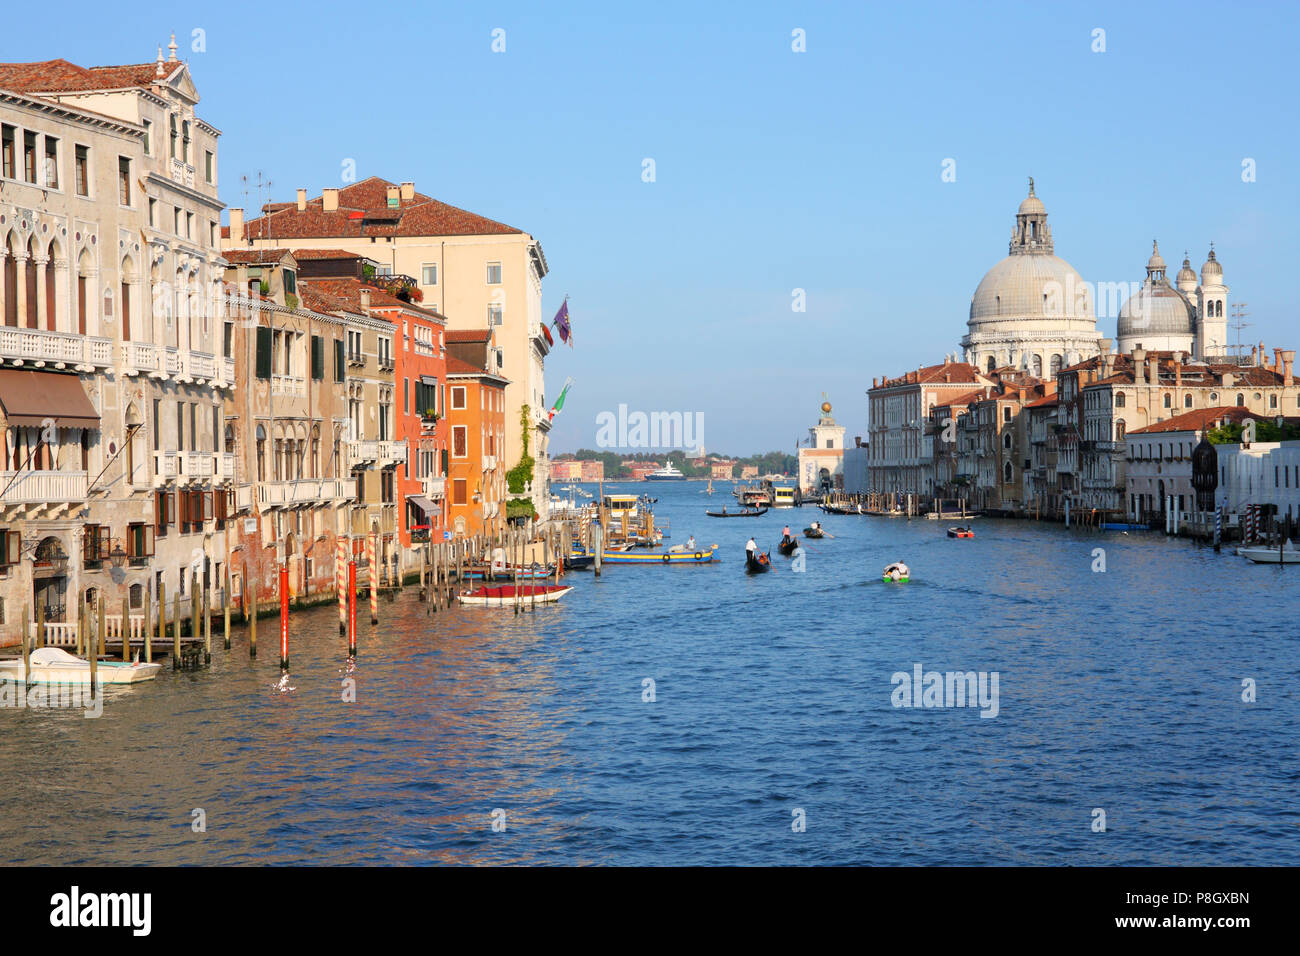 Venice, Italy - old town cityscape with famous Grand Canal. UNESCO World Heritage Site. Stock Photo